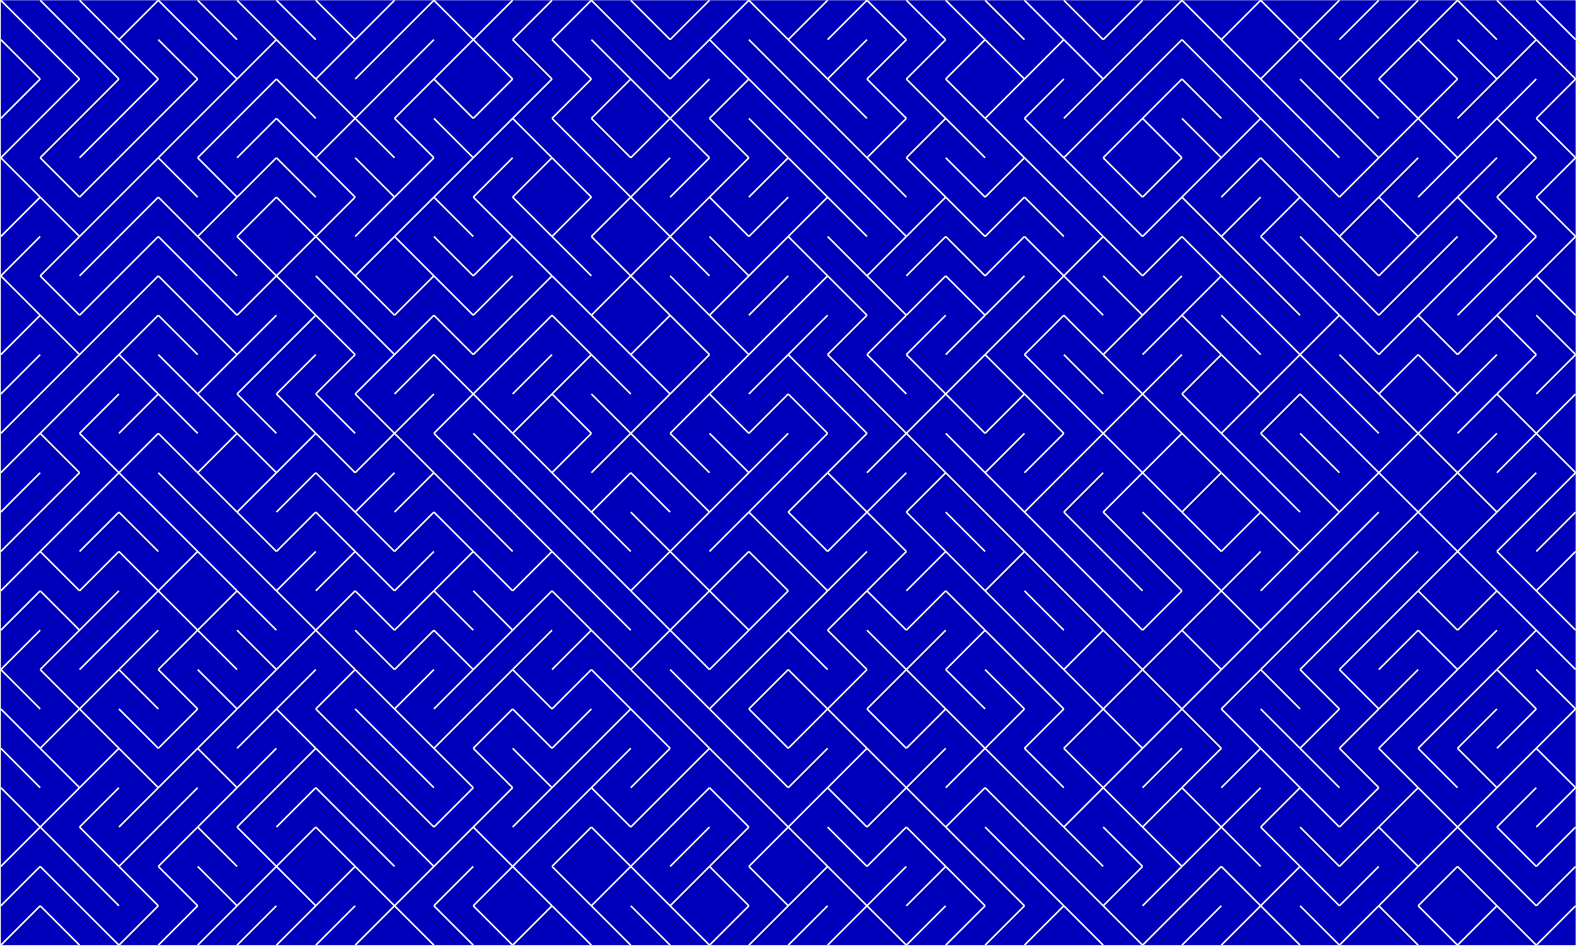 A maze created by randomly placing walls. Each wall is in one of two perpendicular orientations. The walls are white and the background is blue.